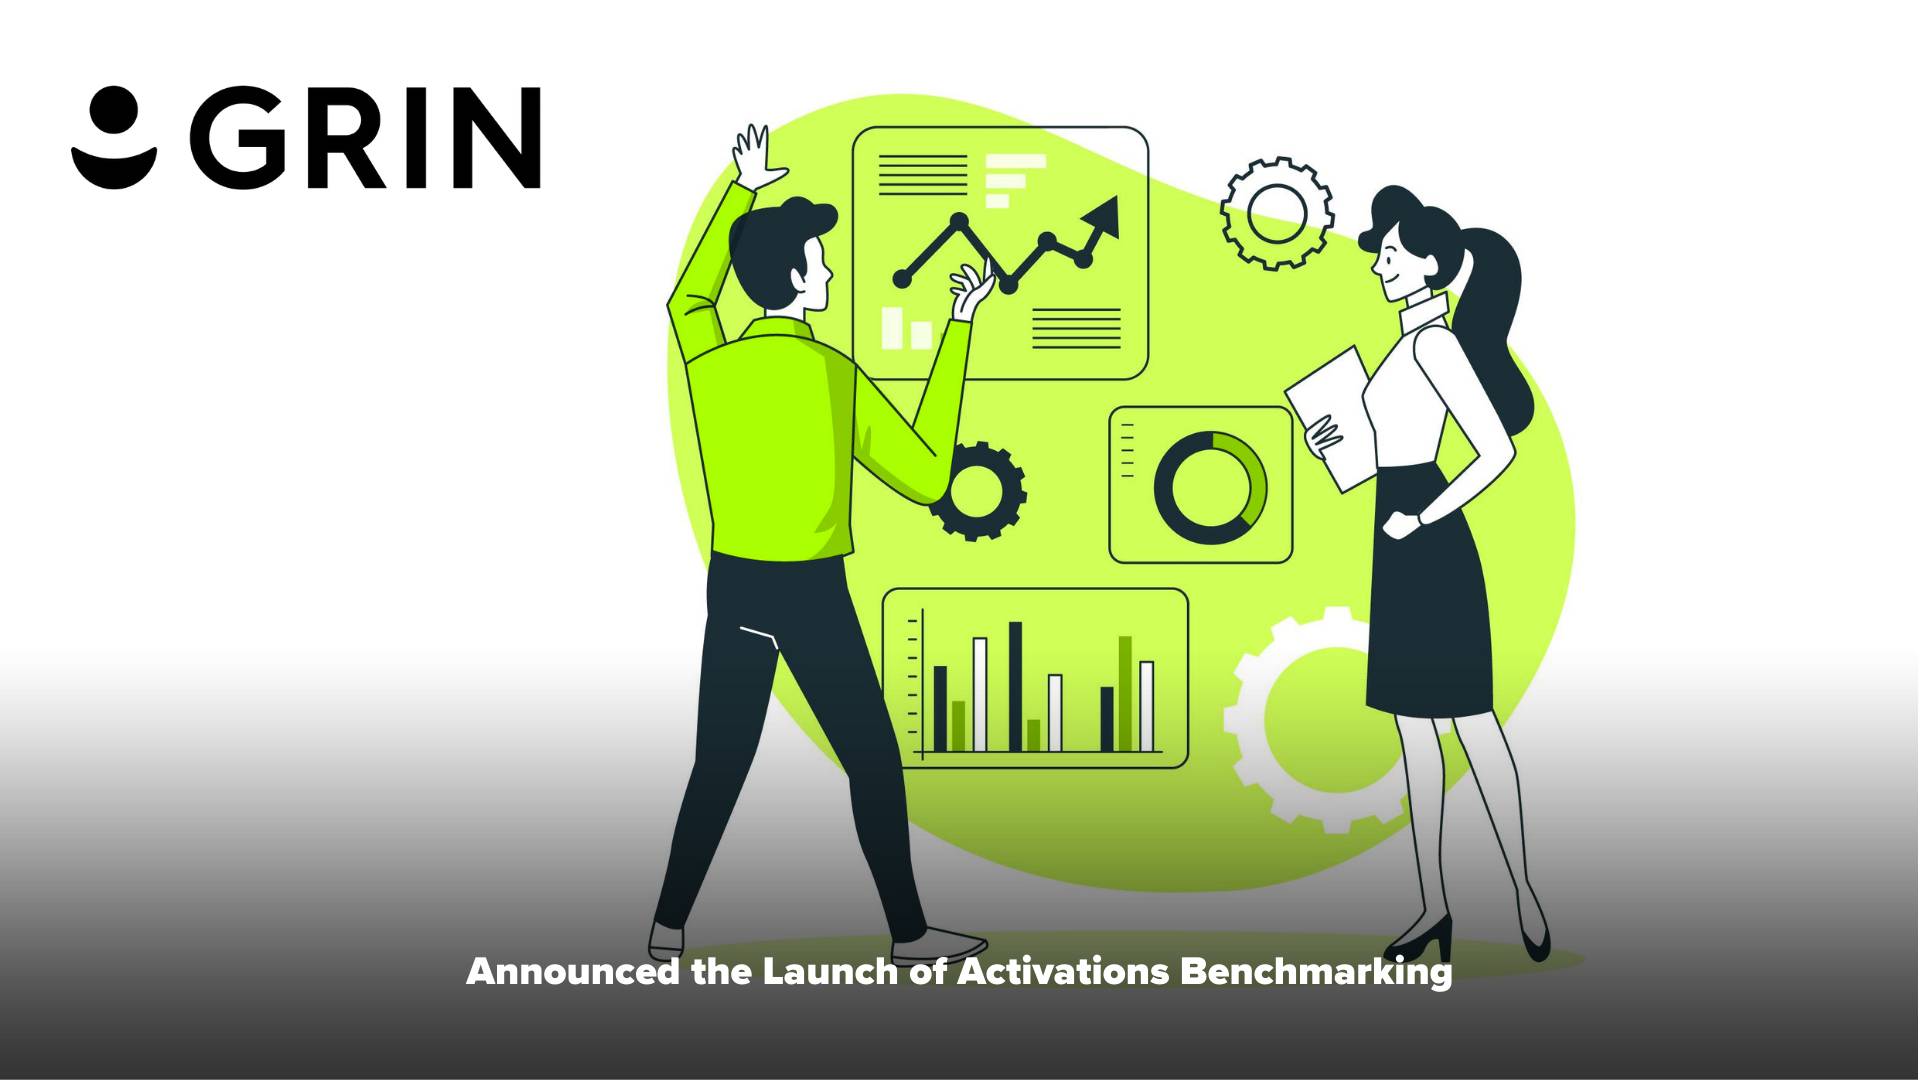 GRIN Unveils Activations Benchmarking Tool, Empowering Brands of All Sizes to Launch Successful, Measurable and Scalable Influencer Programs